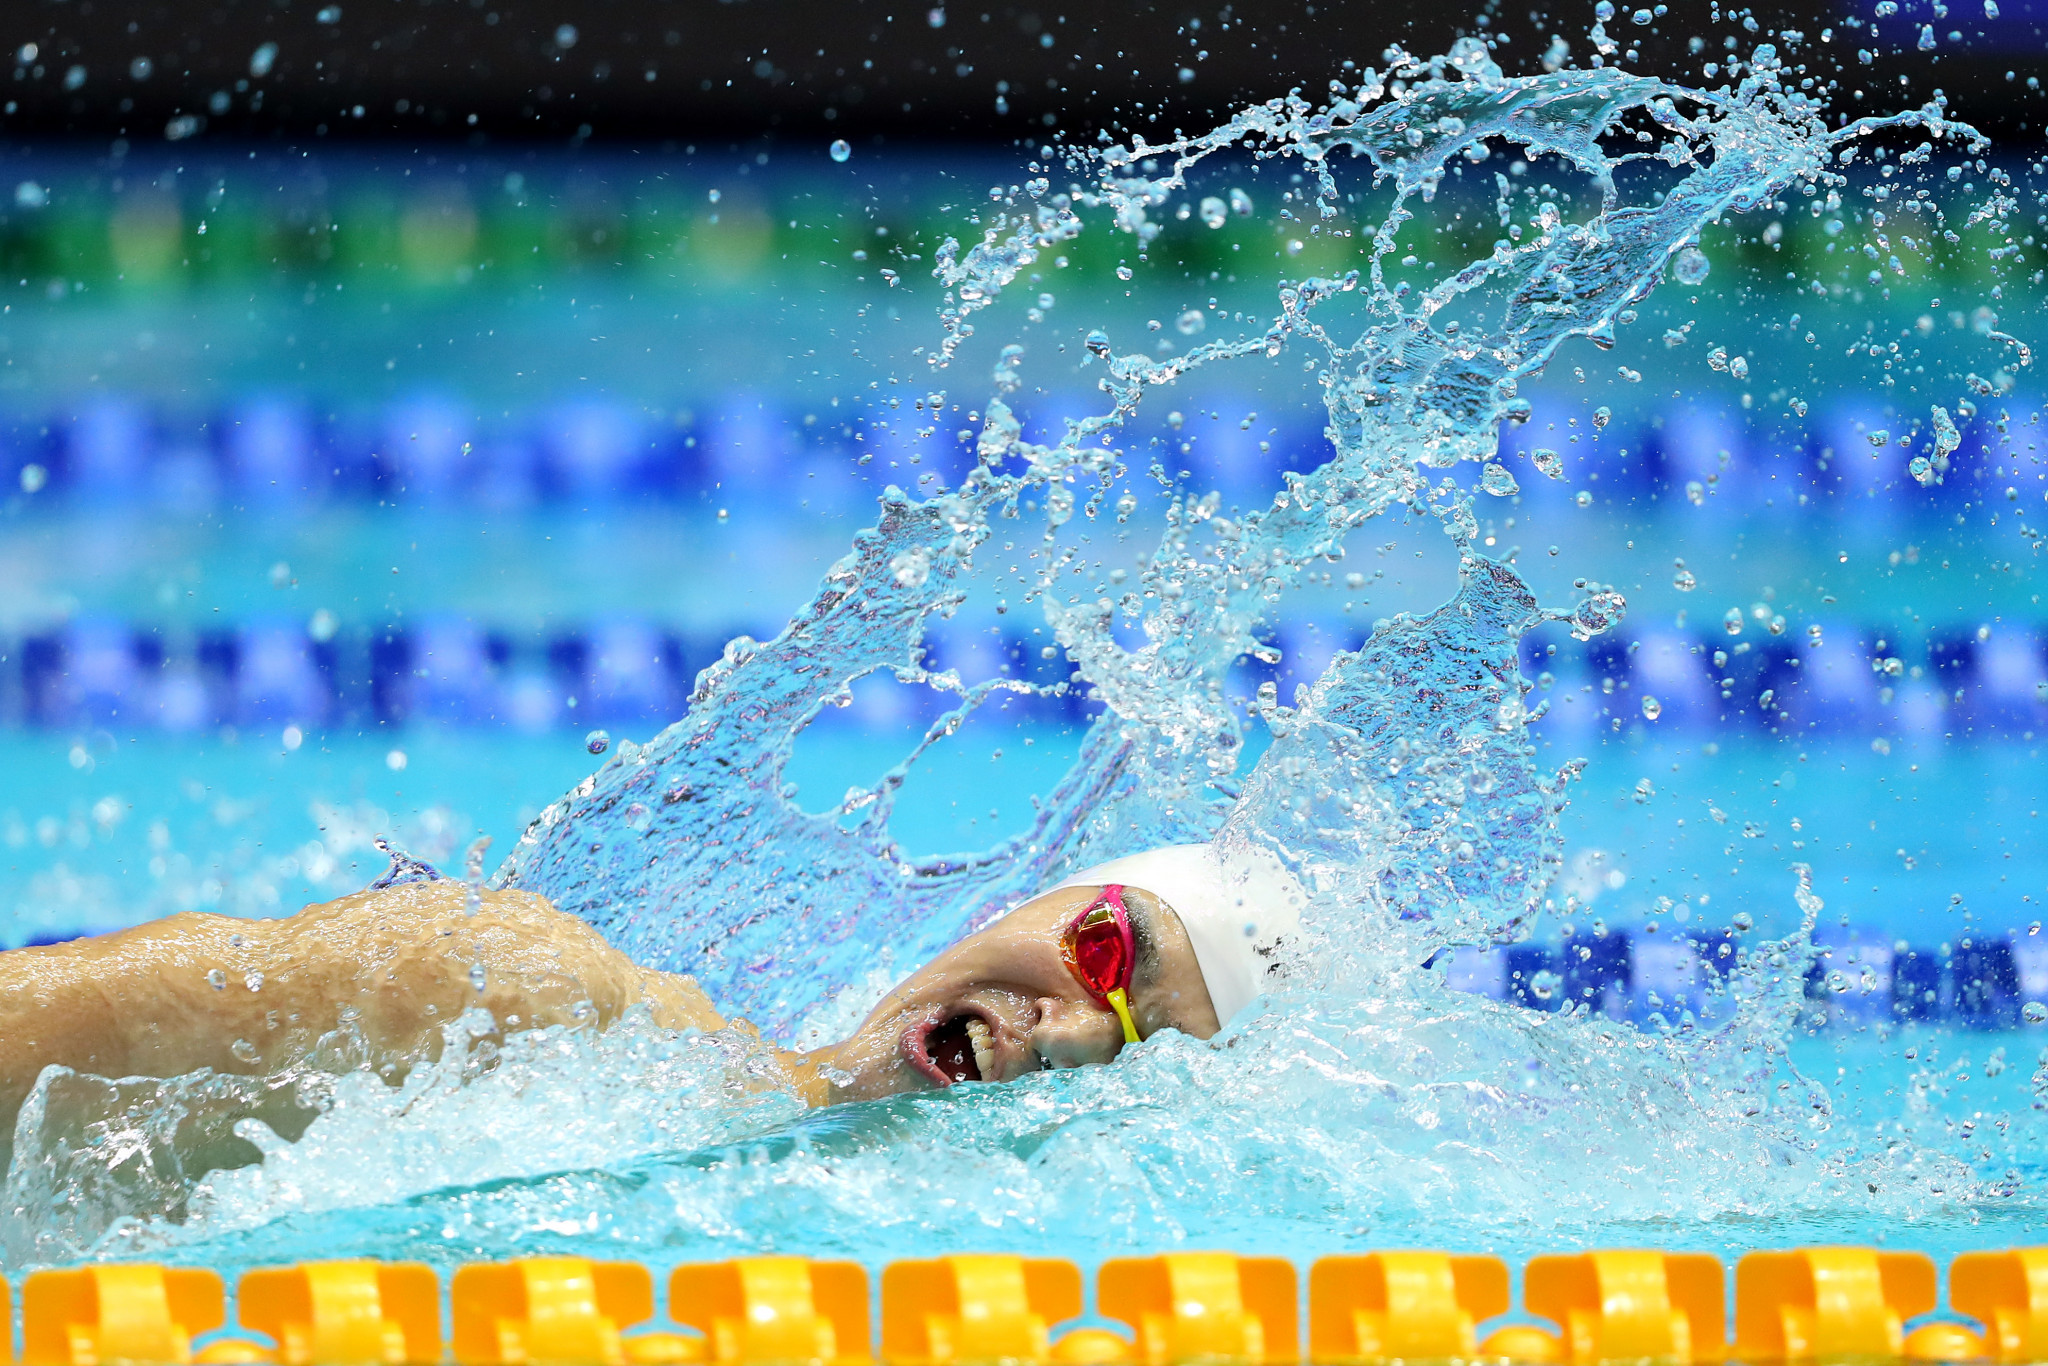 Sun Yang will give testimony during the public CAS hearing ©Getty Images